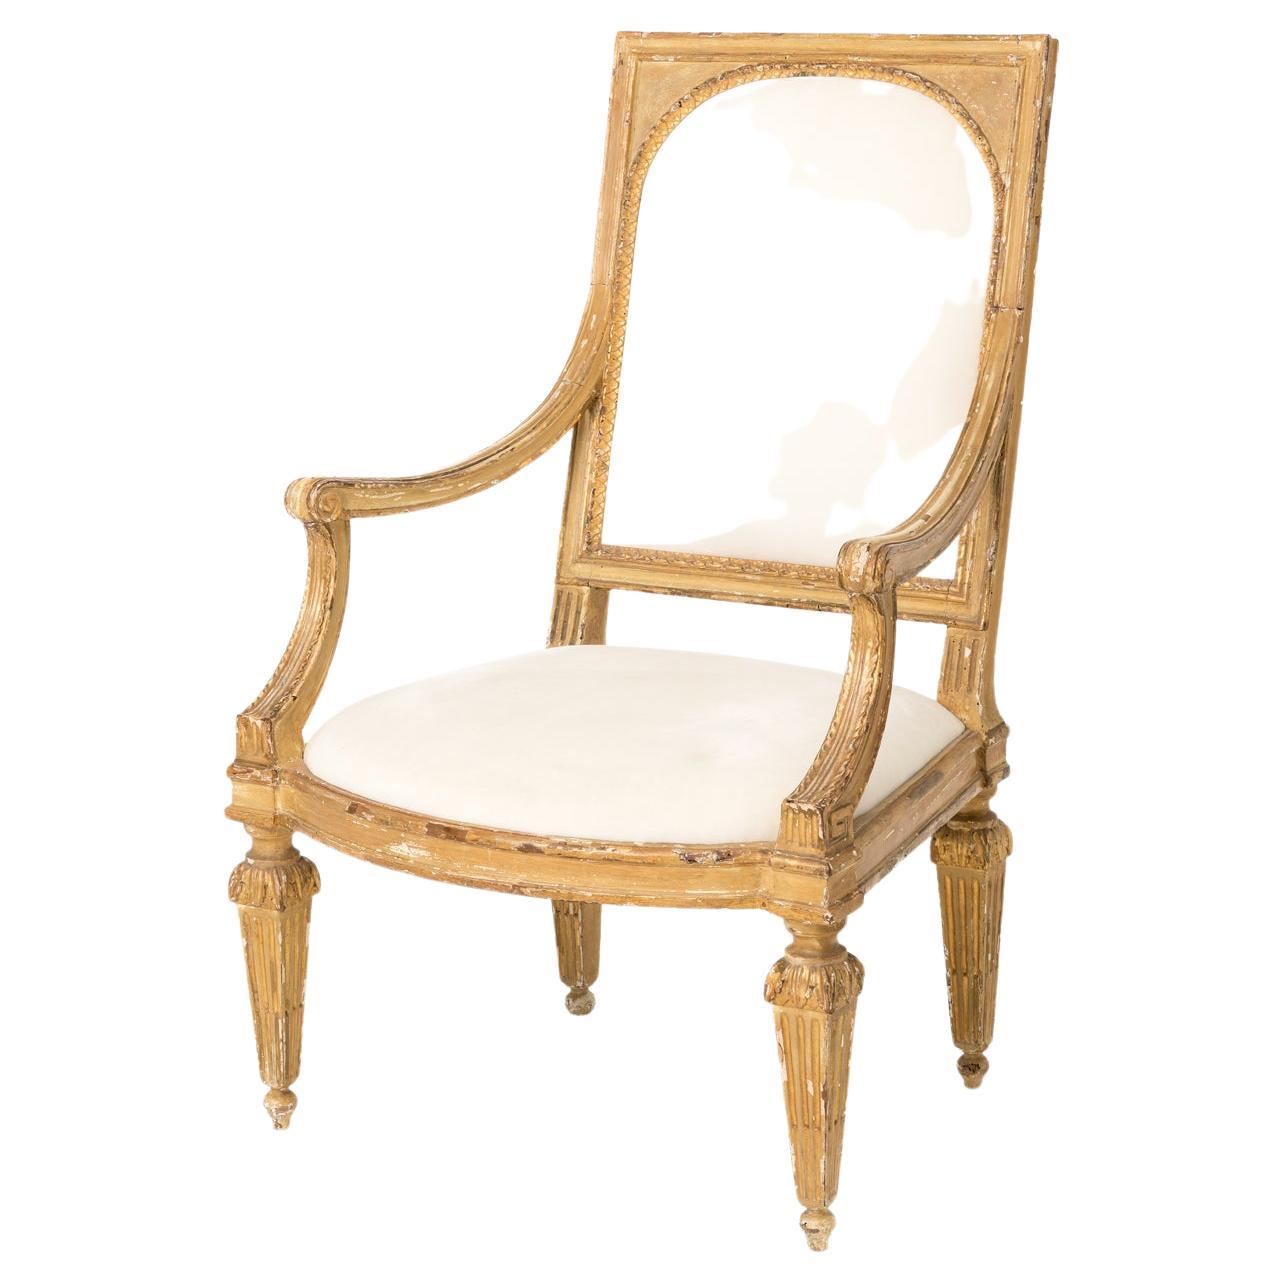 Large Fauteuil Louis XVI in Carved and Gilded Wood, 18th Century